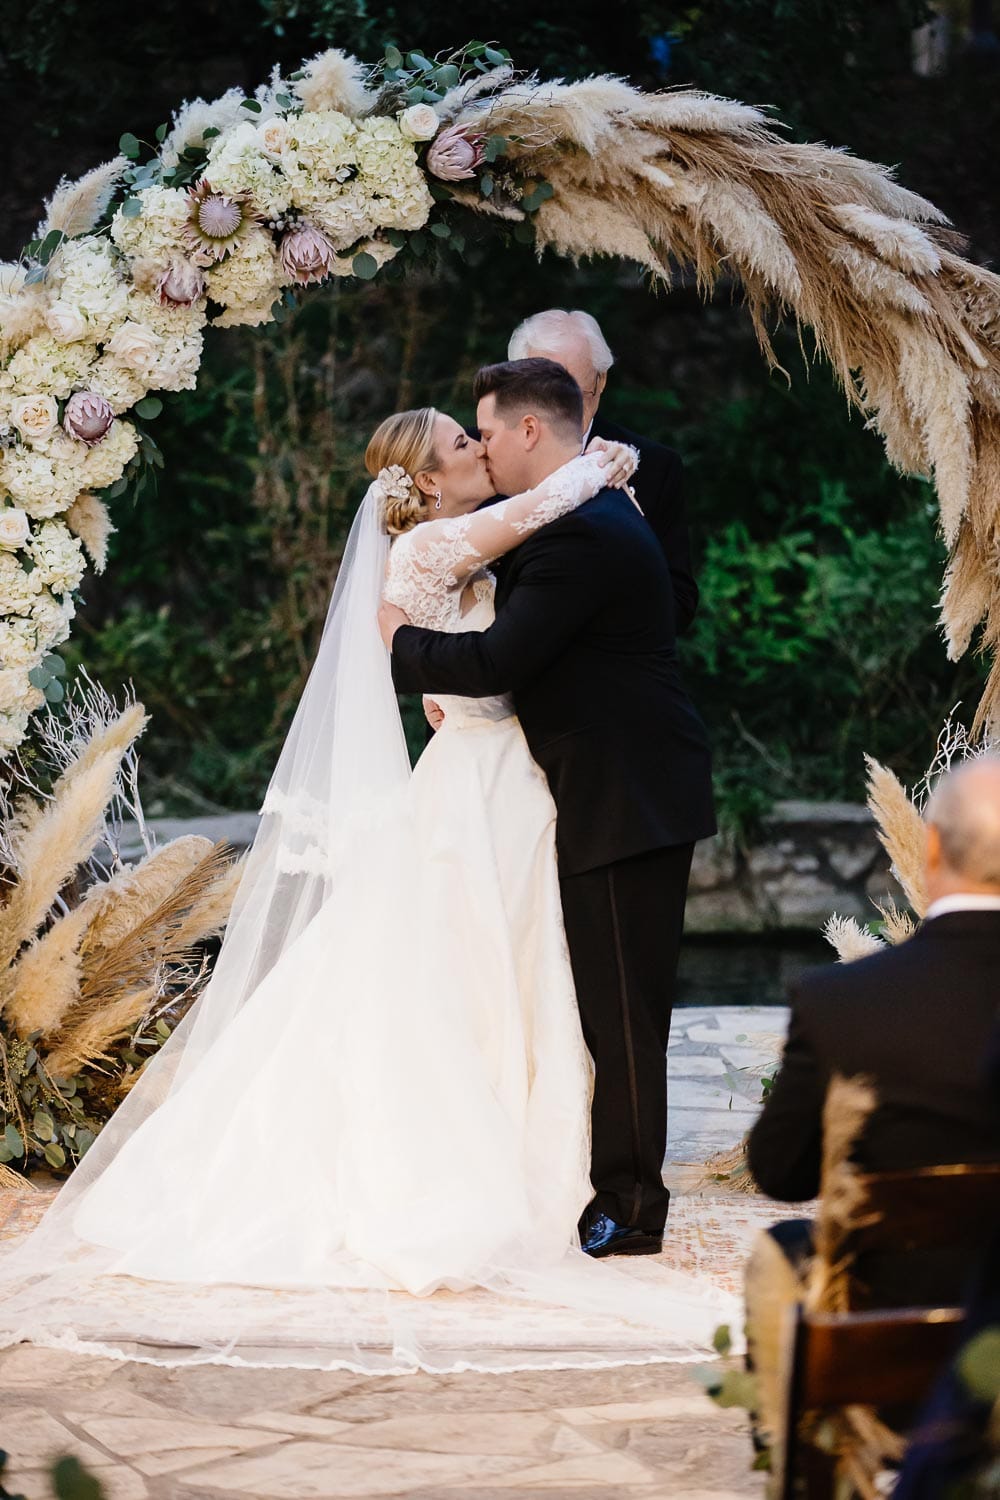 The couple enjoy their first kiss in front of a beautiful floral arrangement at The Witte Museum wedding